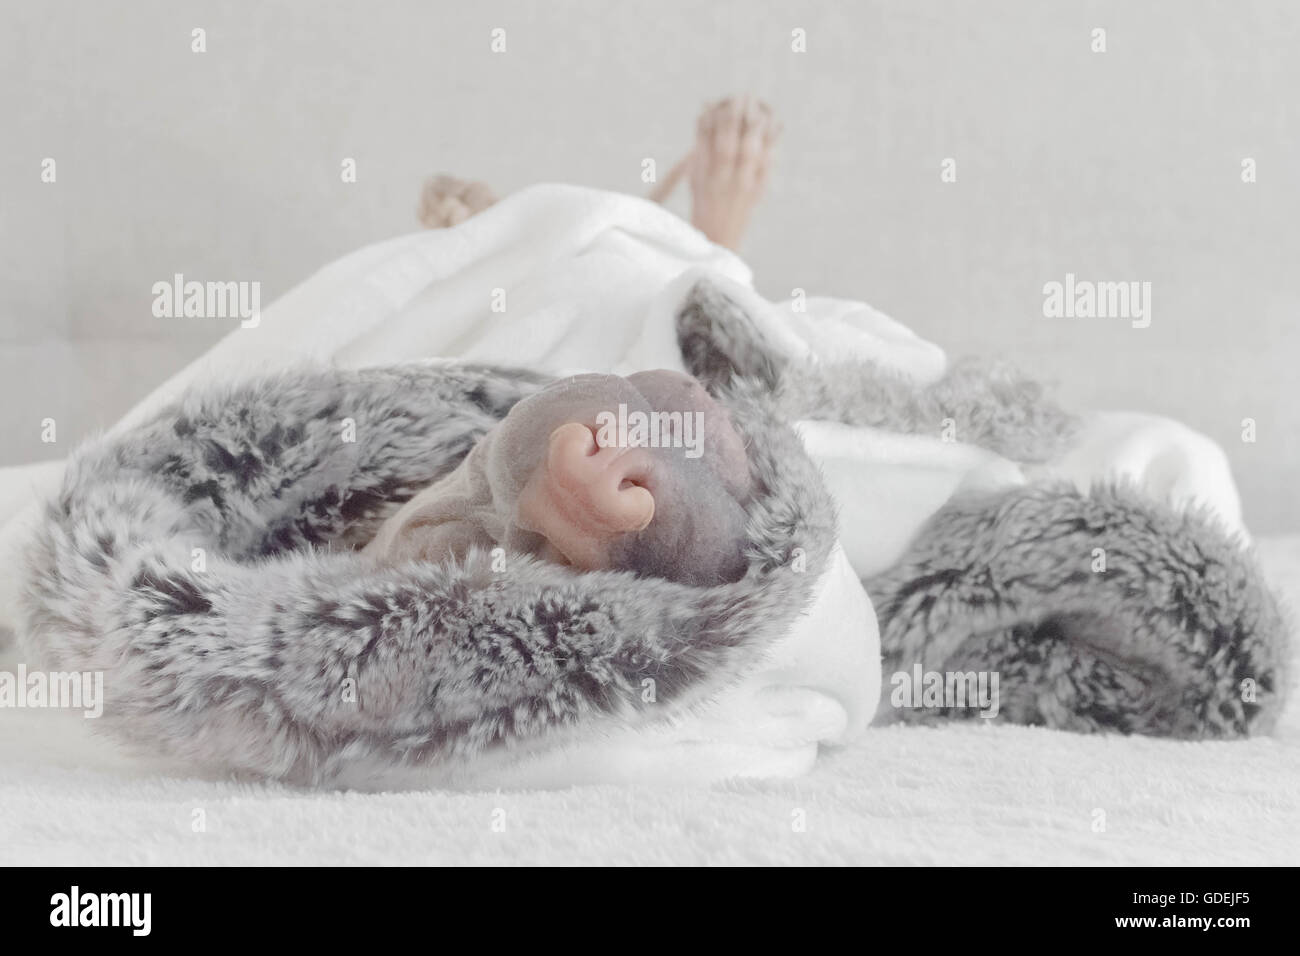 Shar pei dog wrapped in a blanket sleeping Stock Photo